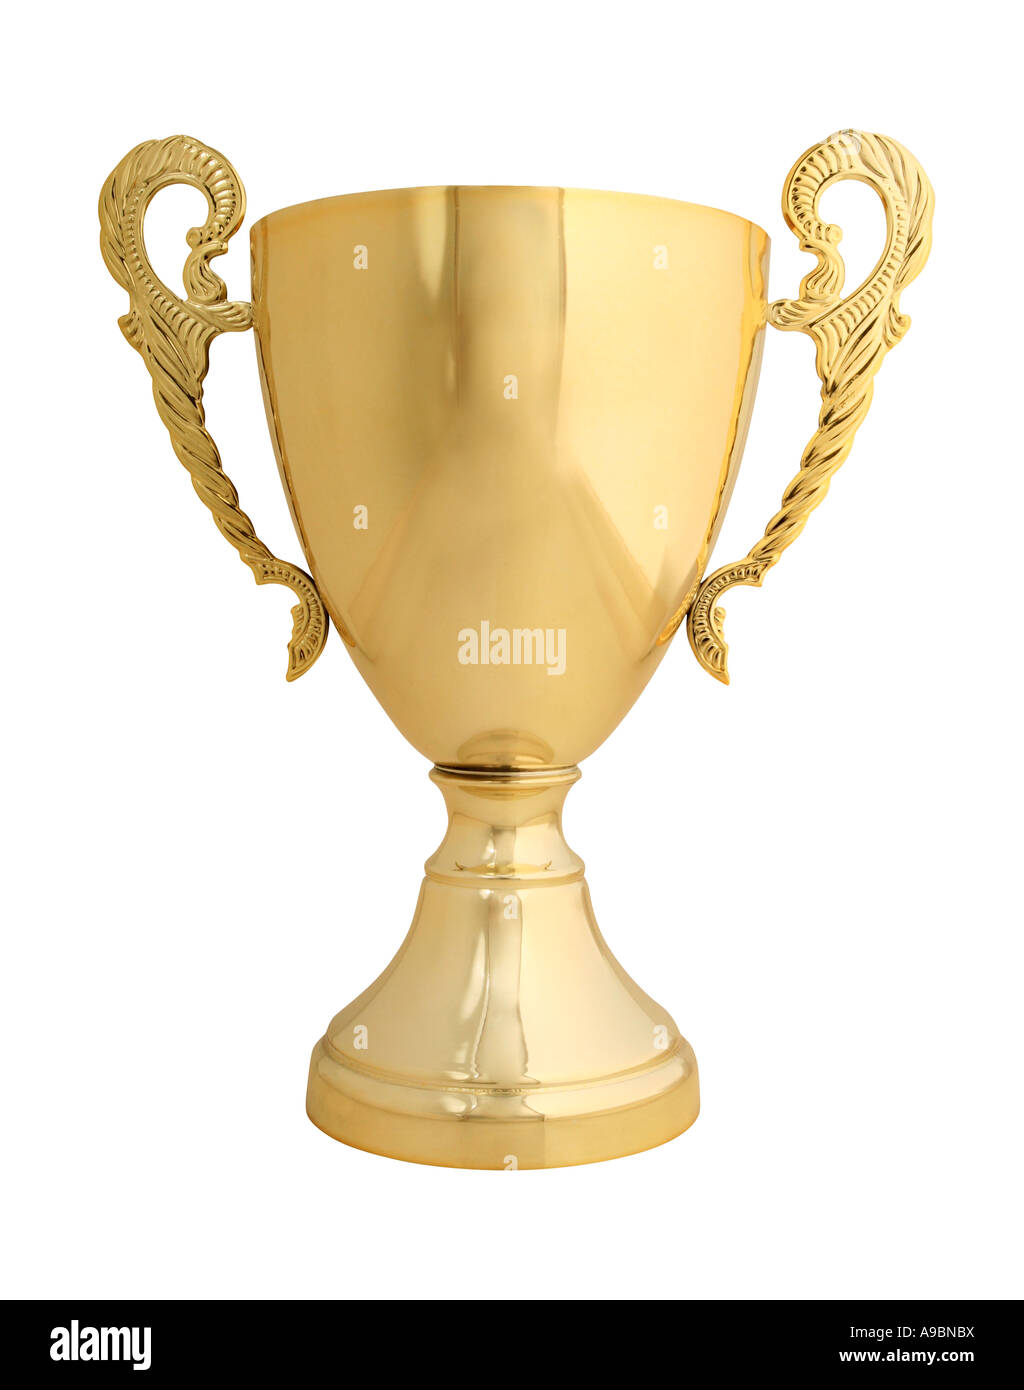 Large golden trophy isolated on white with clipping path real object not a 3D render Stock Photo